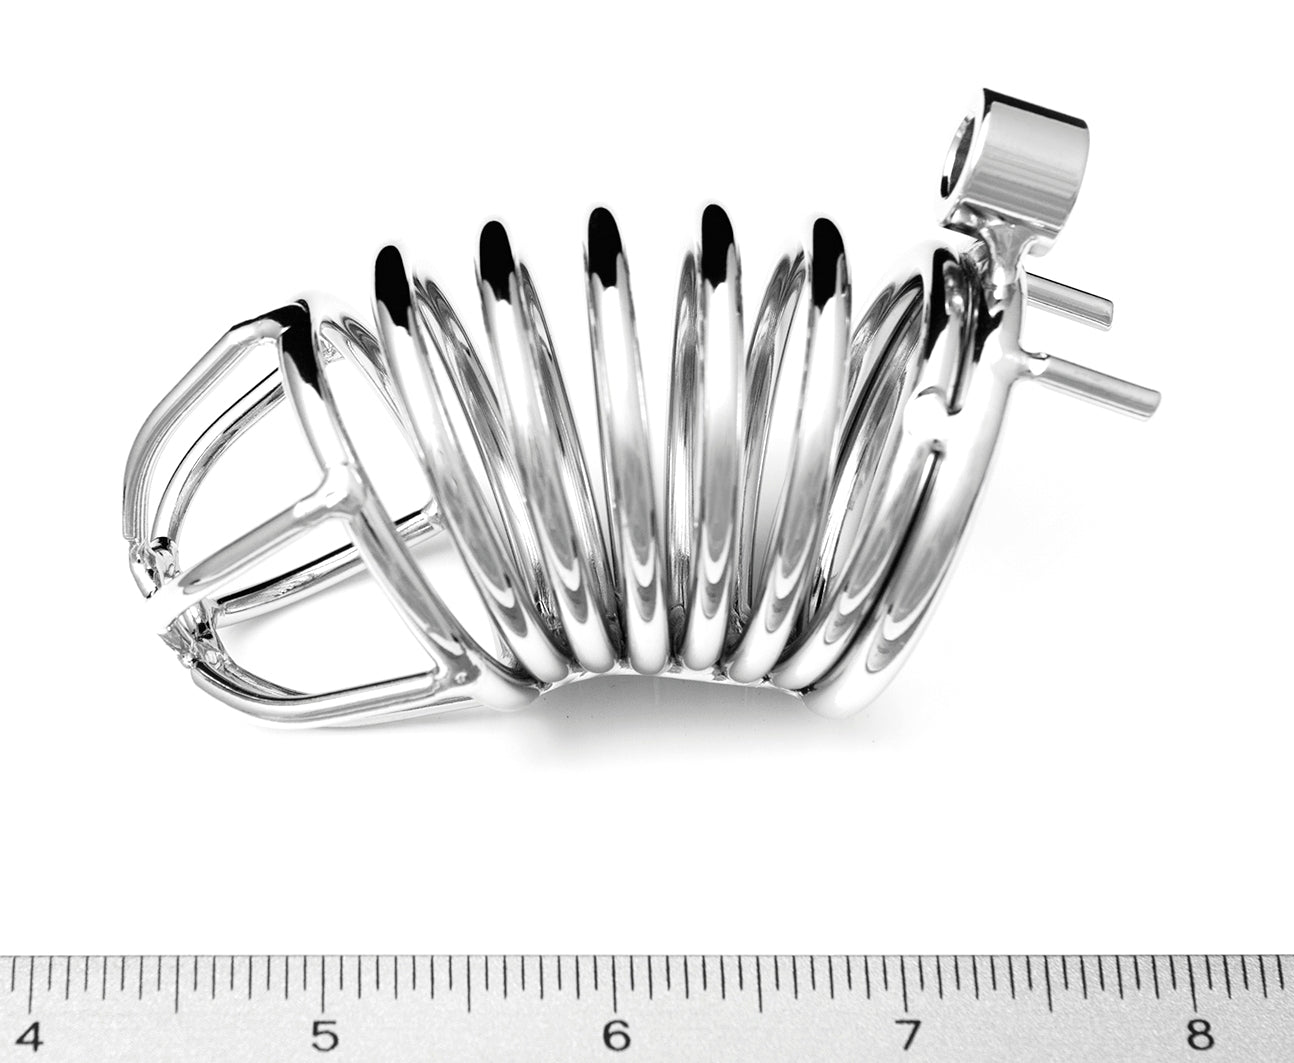 JAIL CELL STEEL CHASTITY DEVICE CHROME